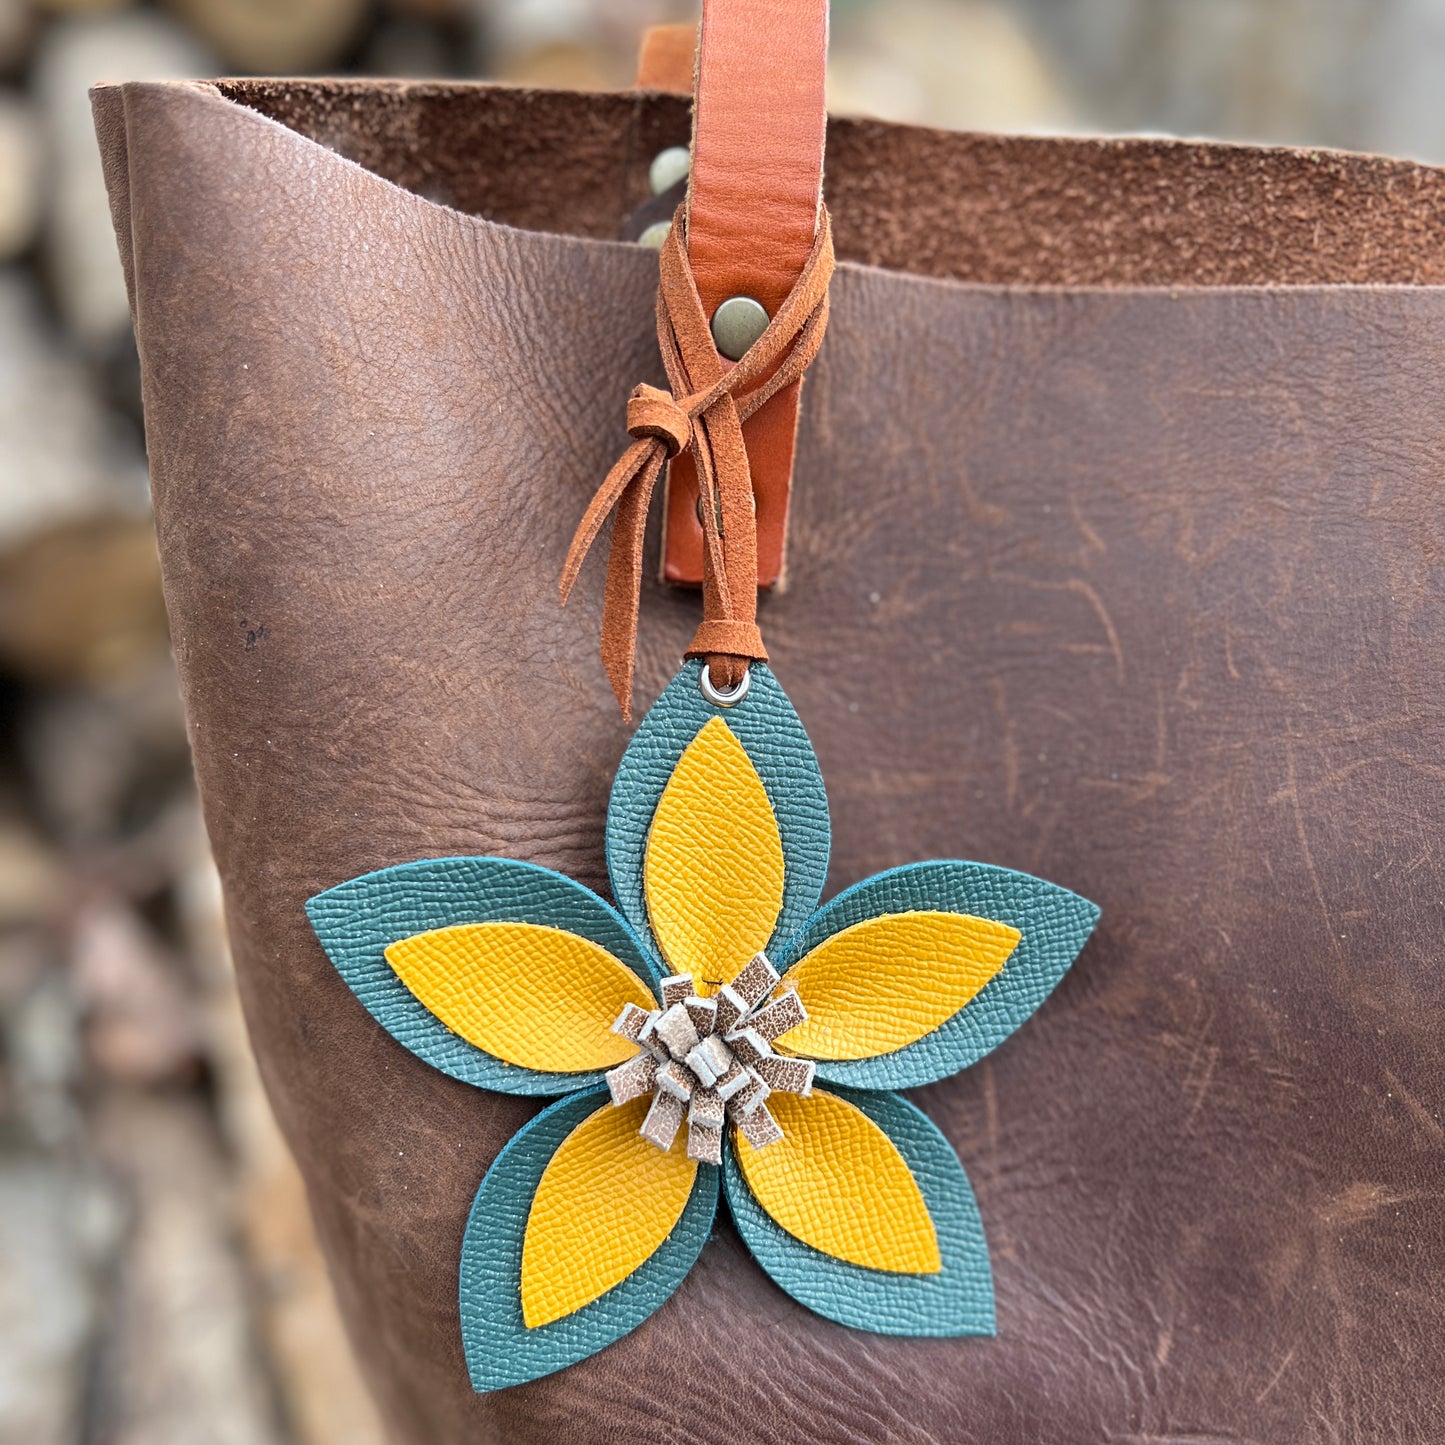 Leather Flower Bag Charm - Large Flower with Loop - Teal, Golden Yellow and Brown